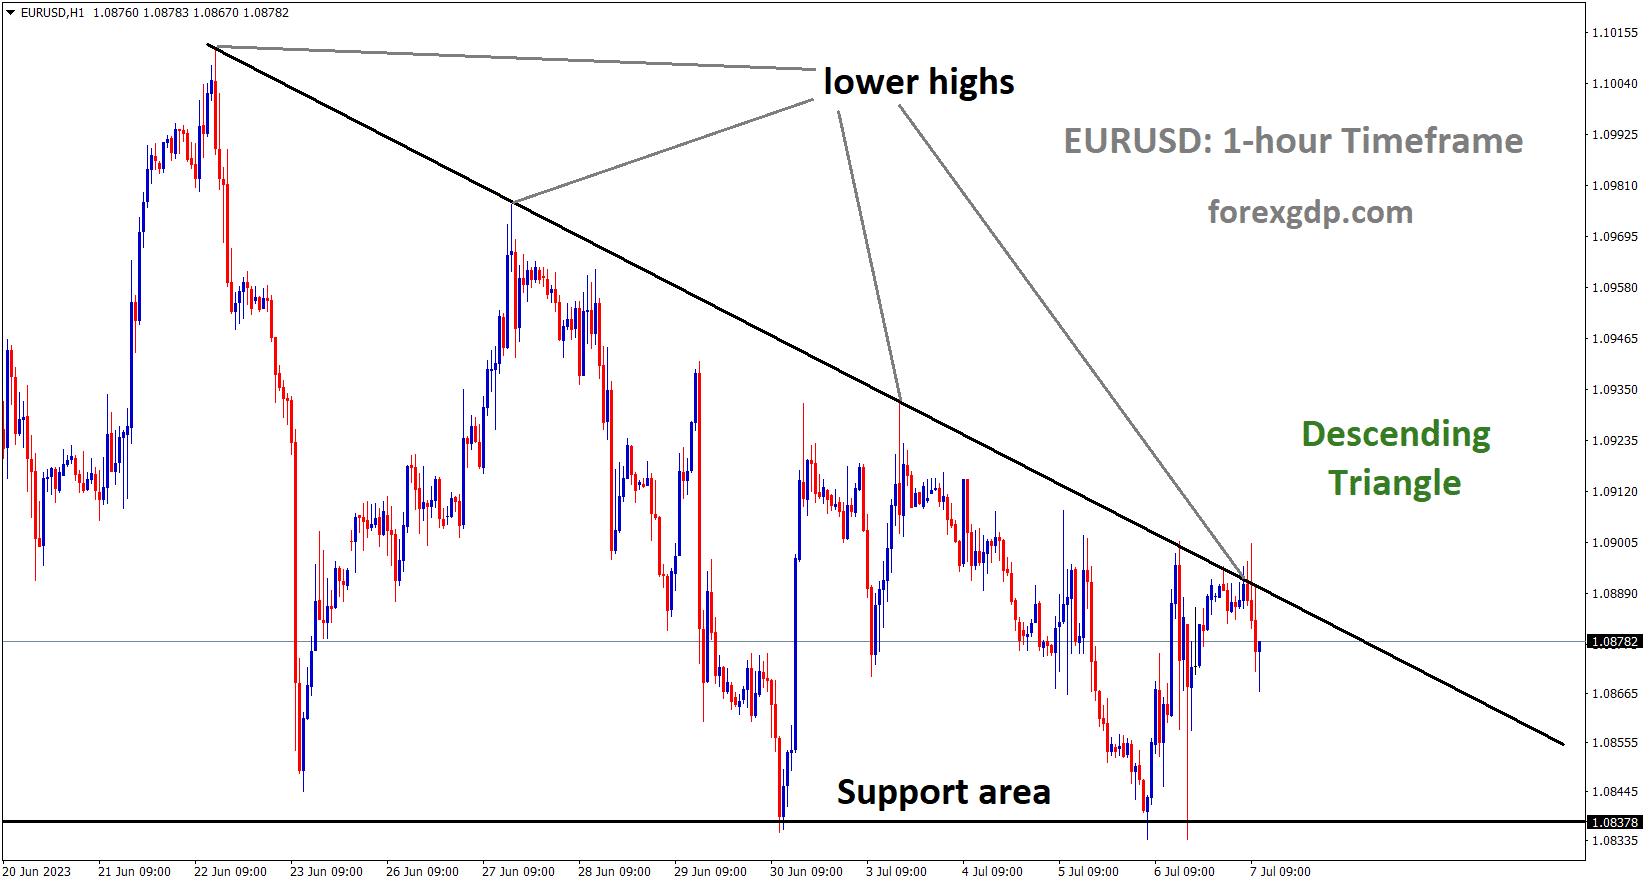 EURUSD is moving in the Descending triangle pattern and the market has fallen from the lower high area of the pattern